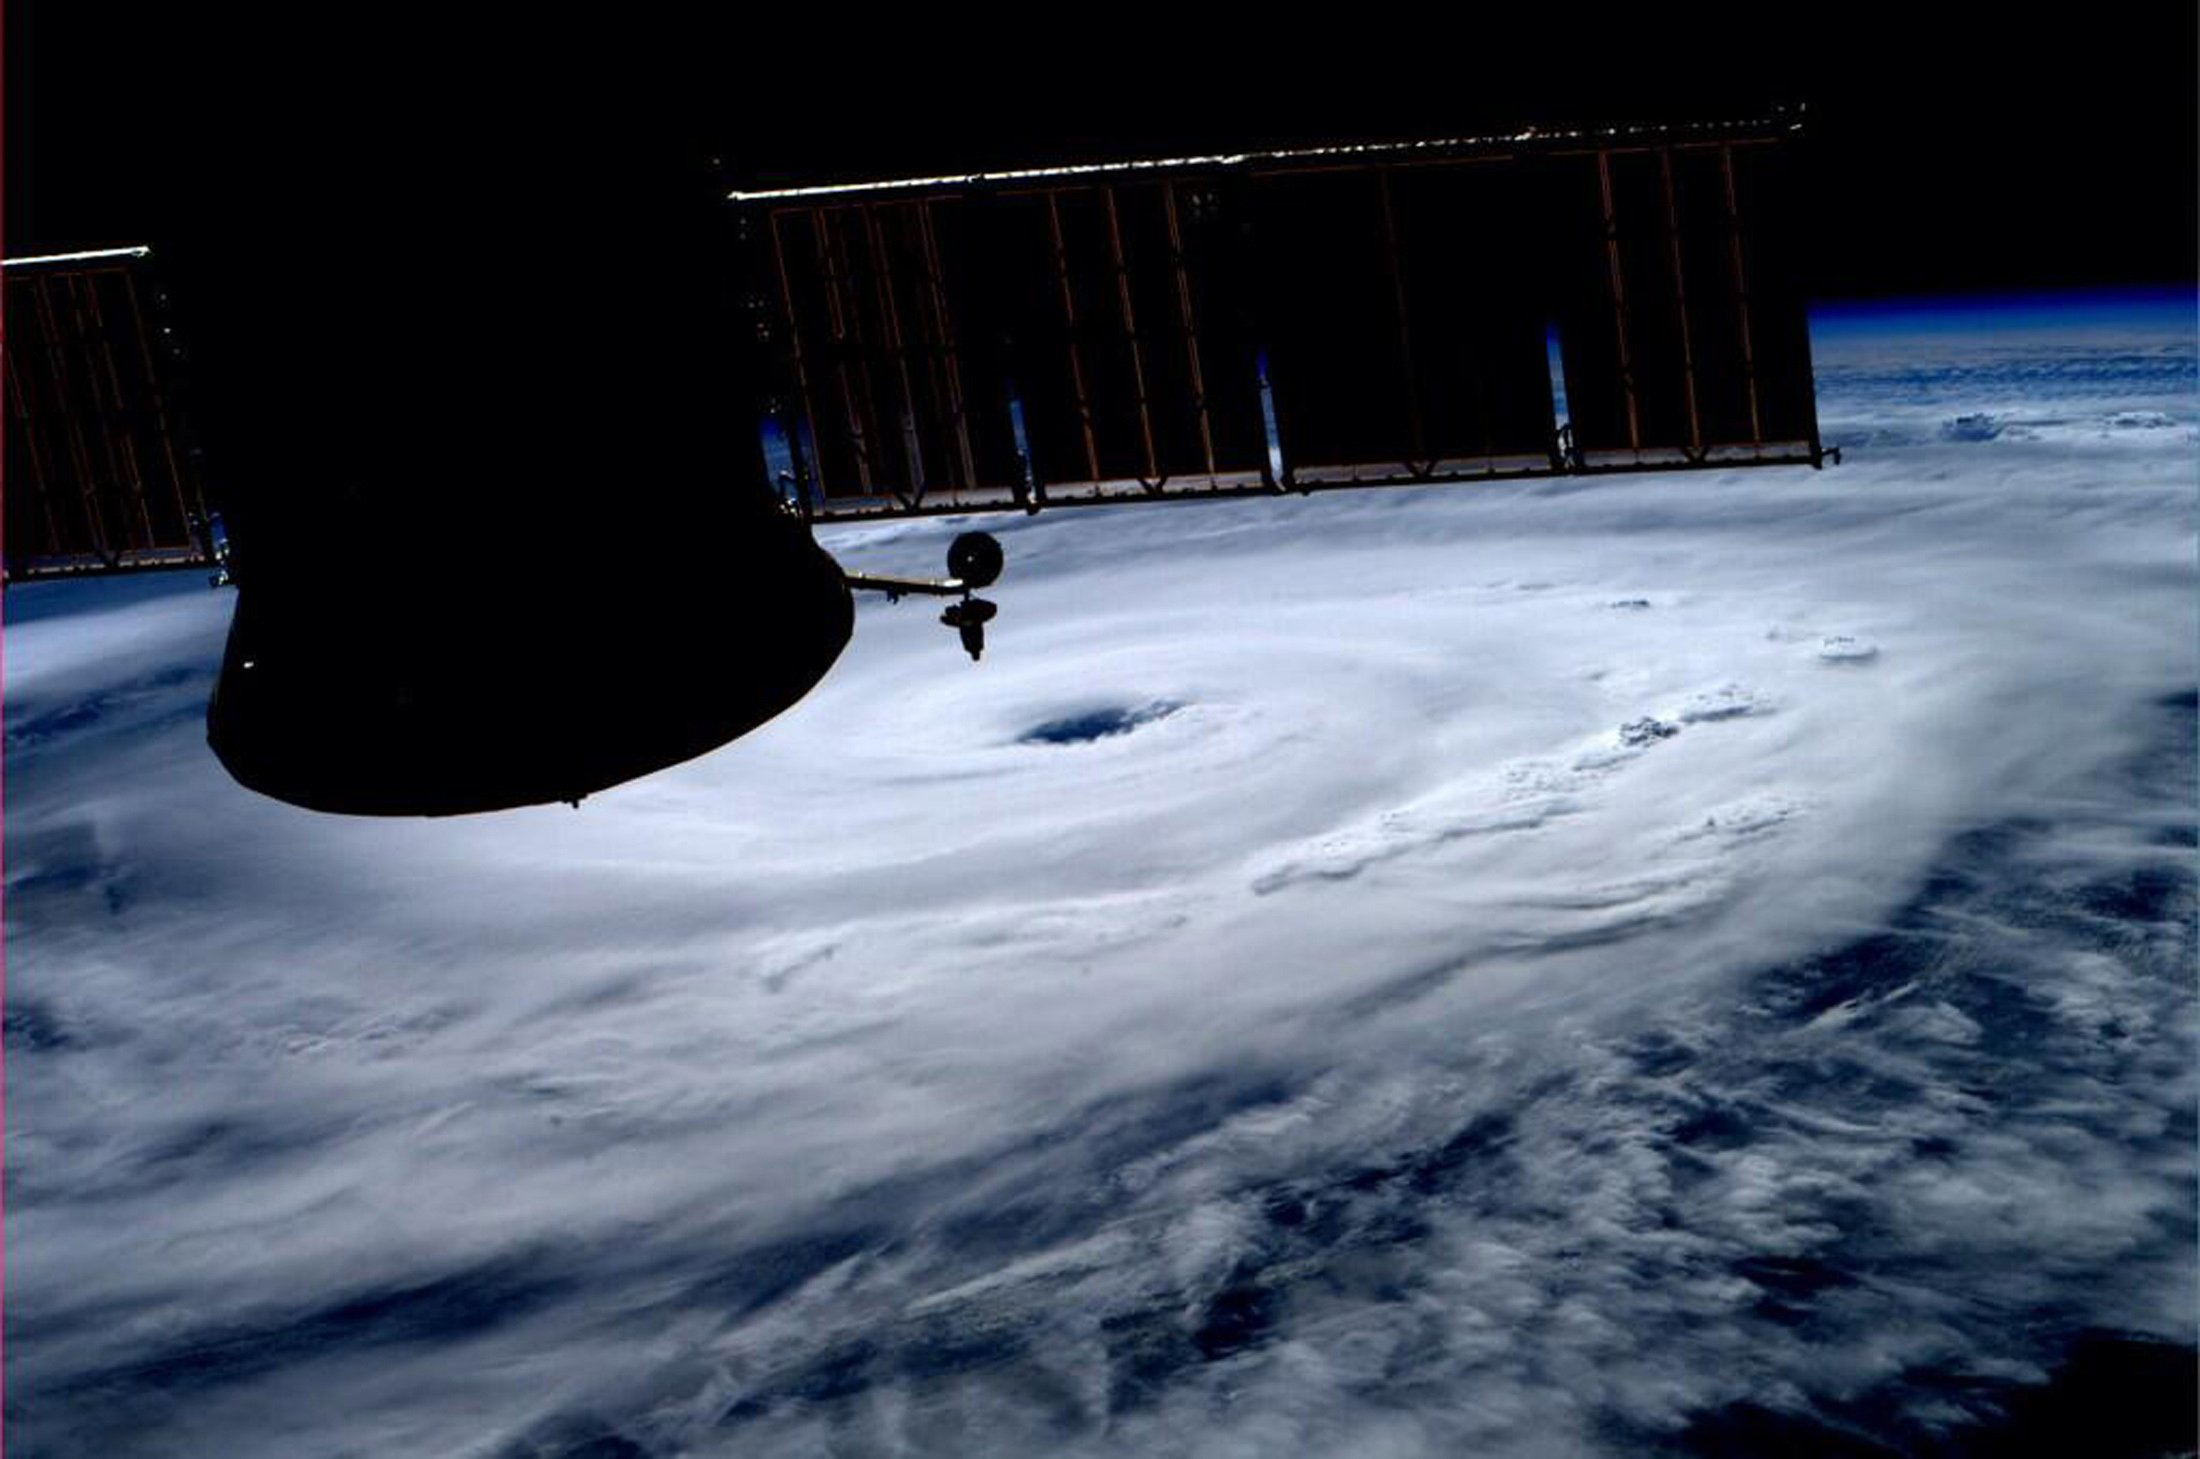 The eye of Hurricane Arthur is seen over the Atlantic in this photo from the International Space Station tweeted by European Space Agency astronaut Alexander Gerst July 3, 2014.